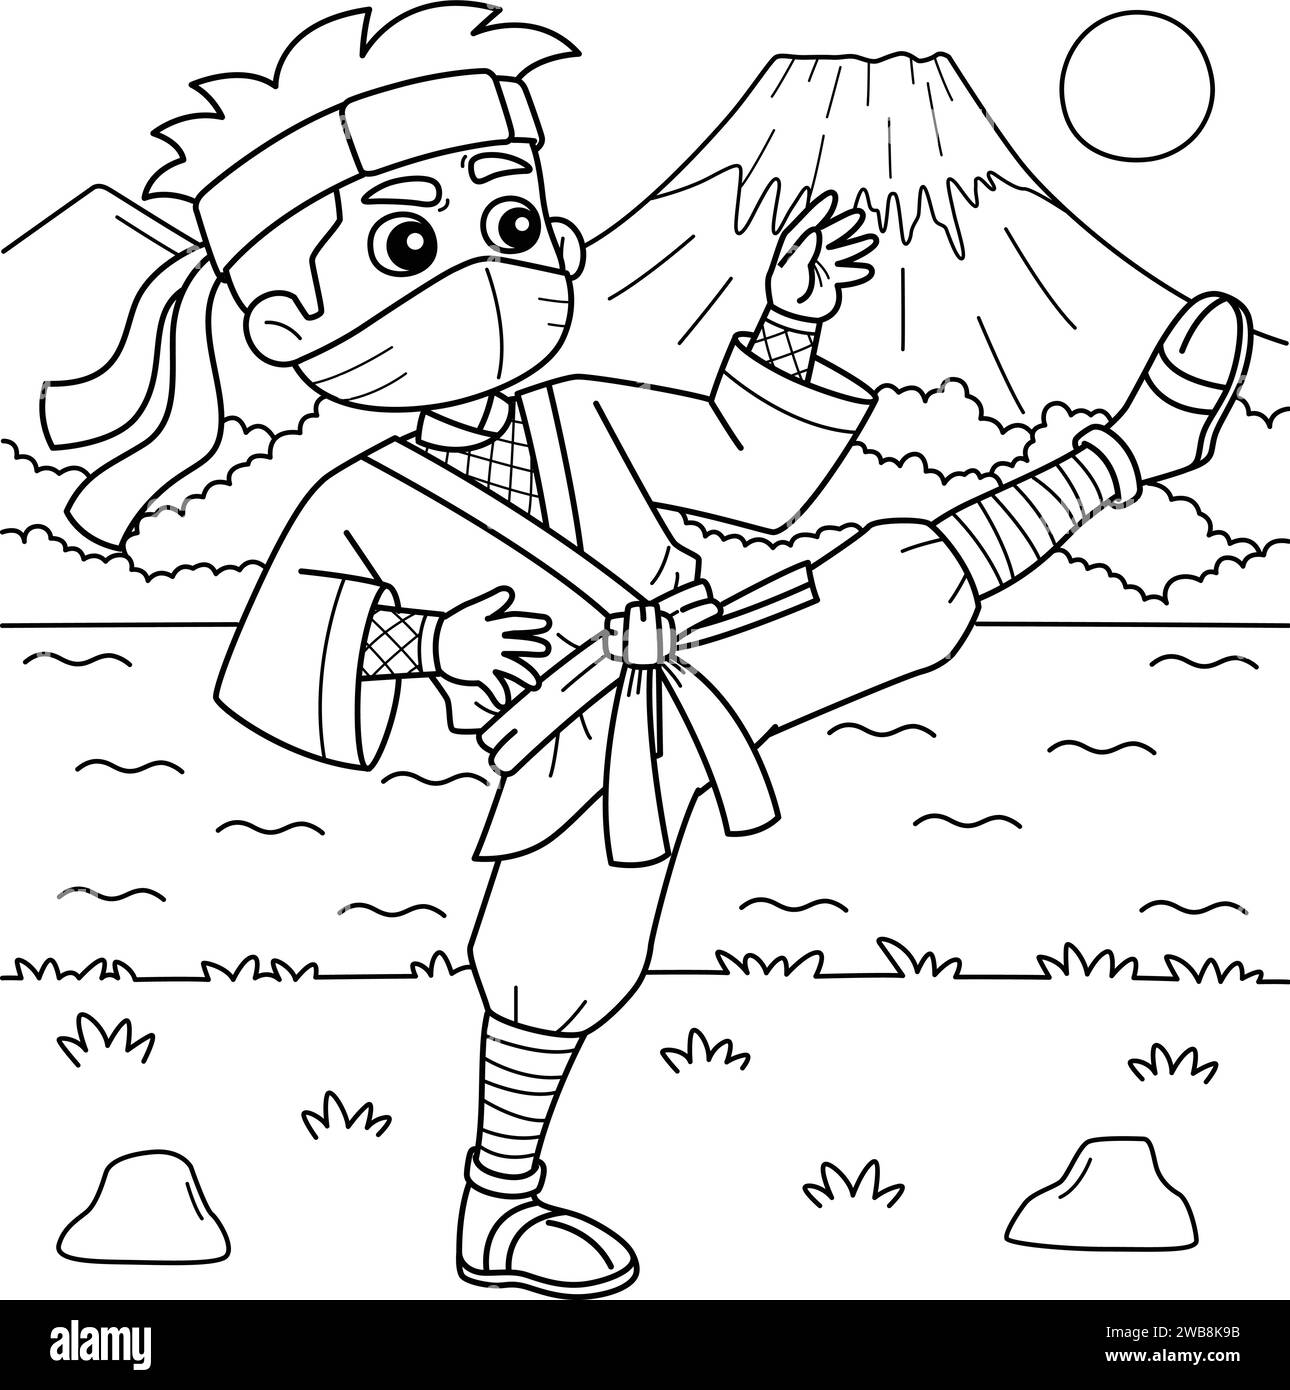 Ninja Doing Martial Arts Coloring Page for Kids Stock Vector